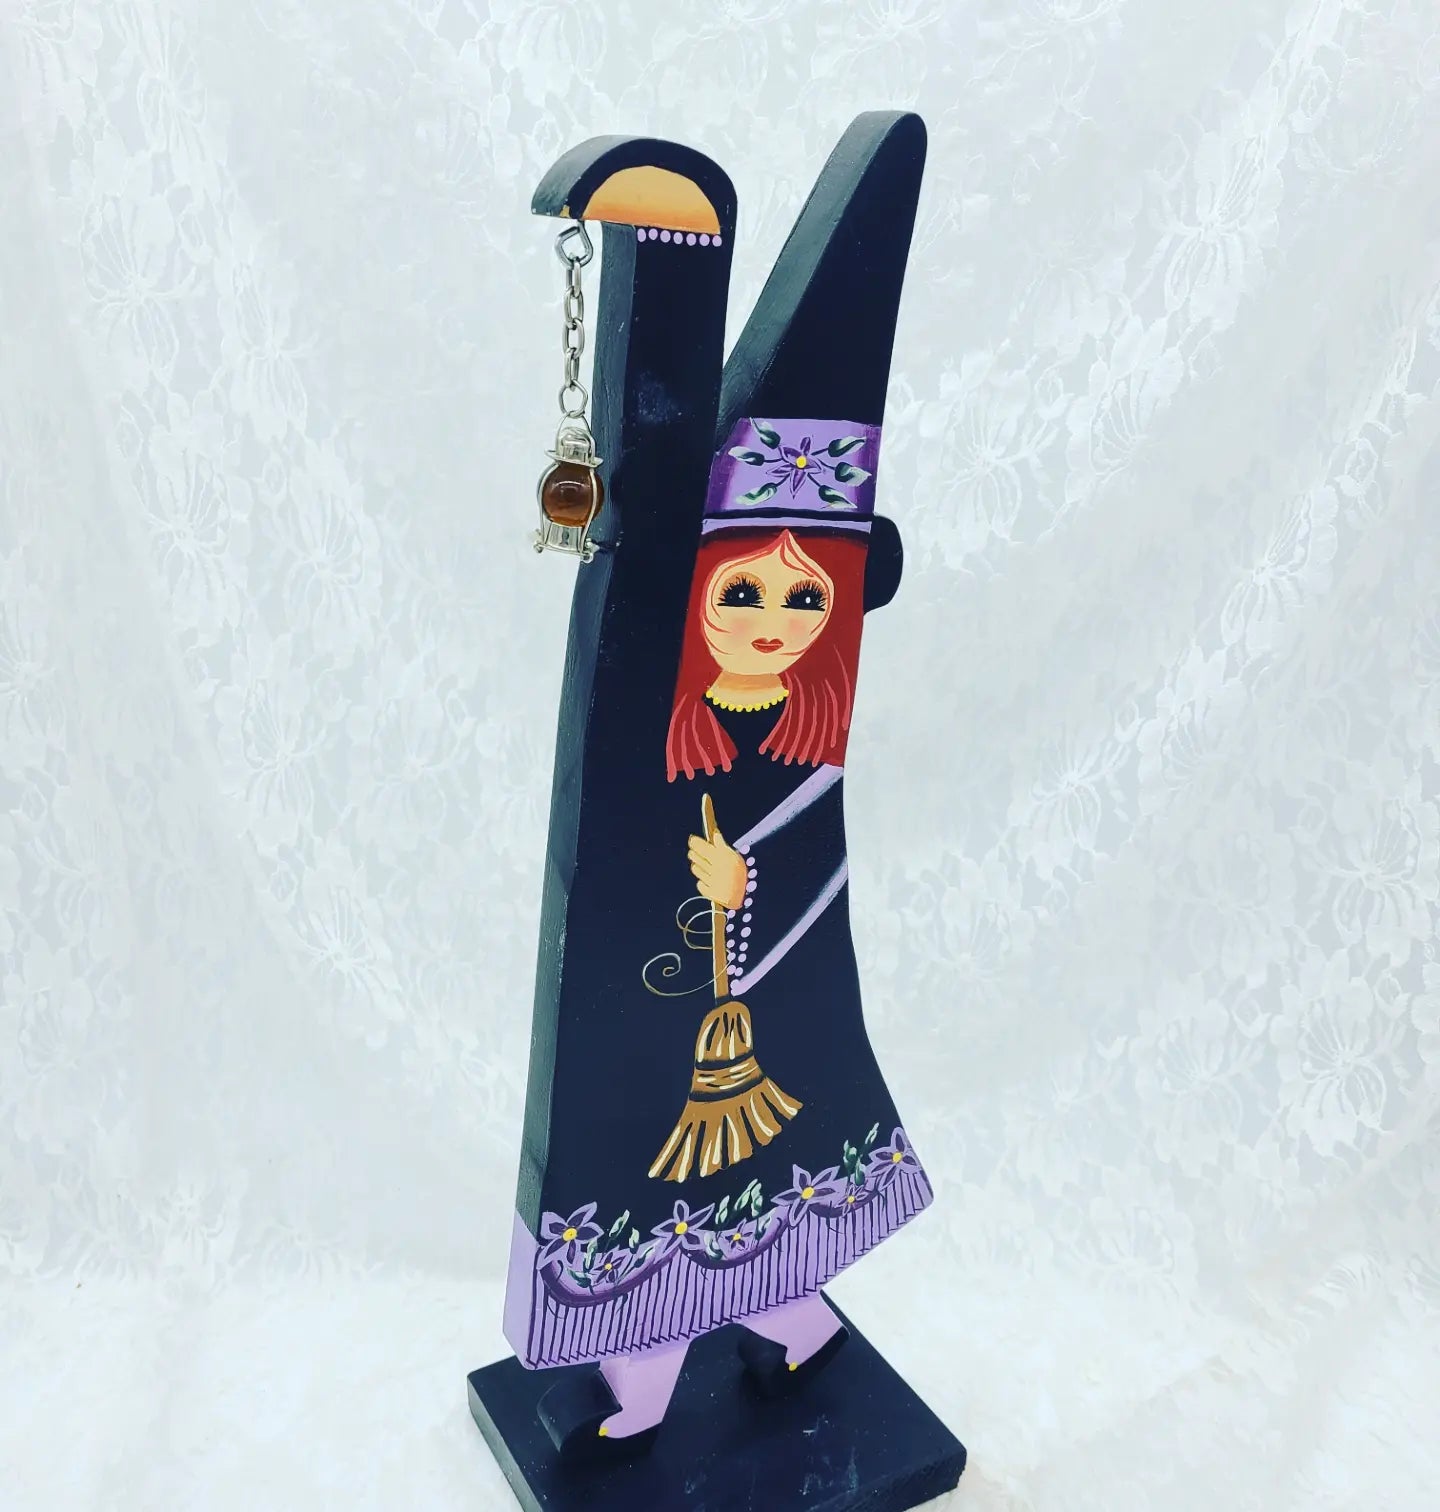 Hand Painted Witch ~ HANDMADE Wood Art Stand Up Decoration Décor Ornament Figure Sign 17" tall ~ Witchy Decoration